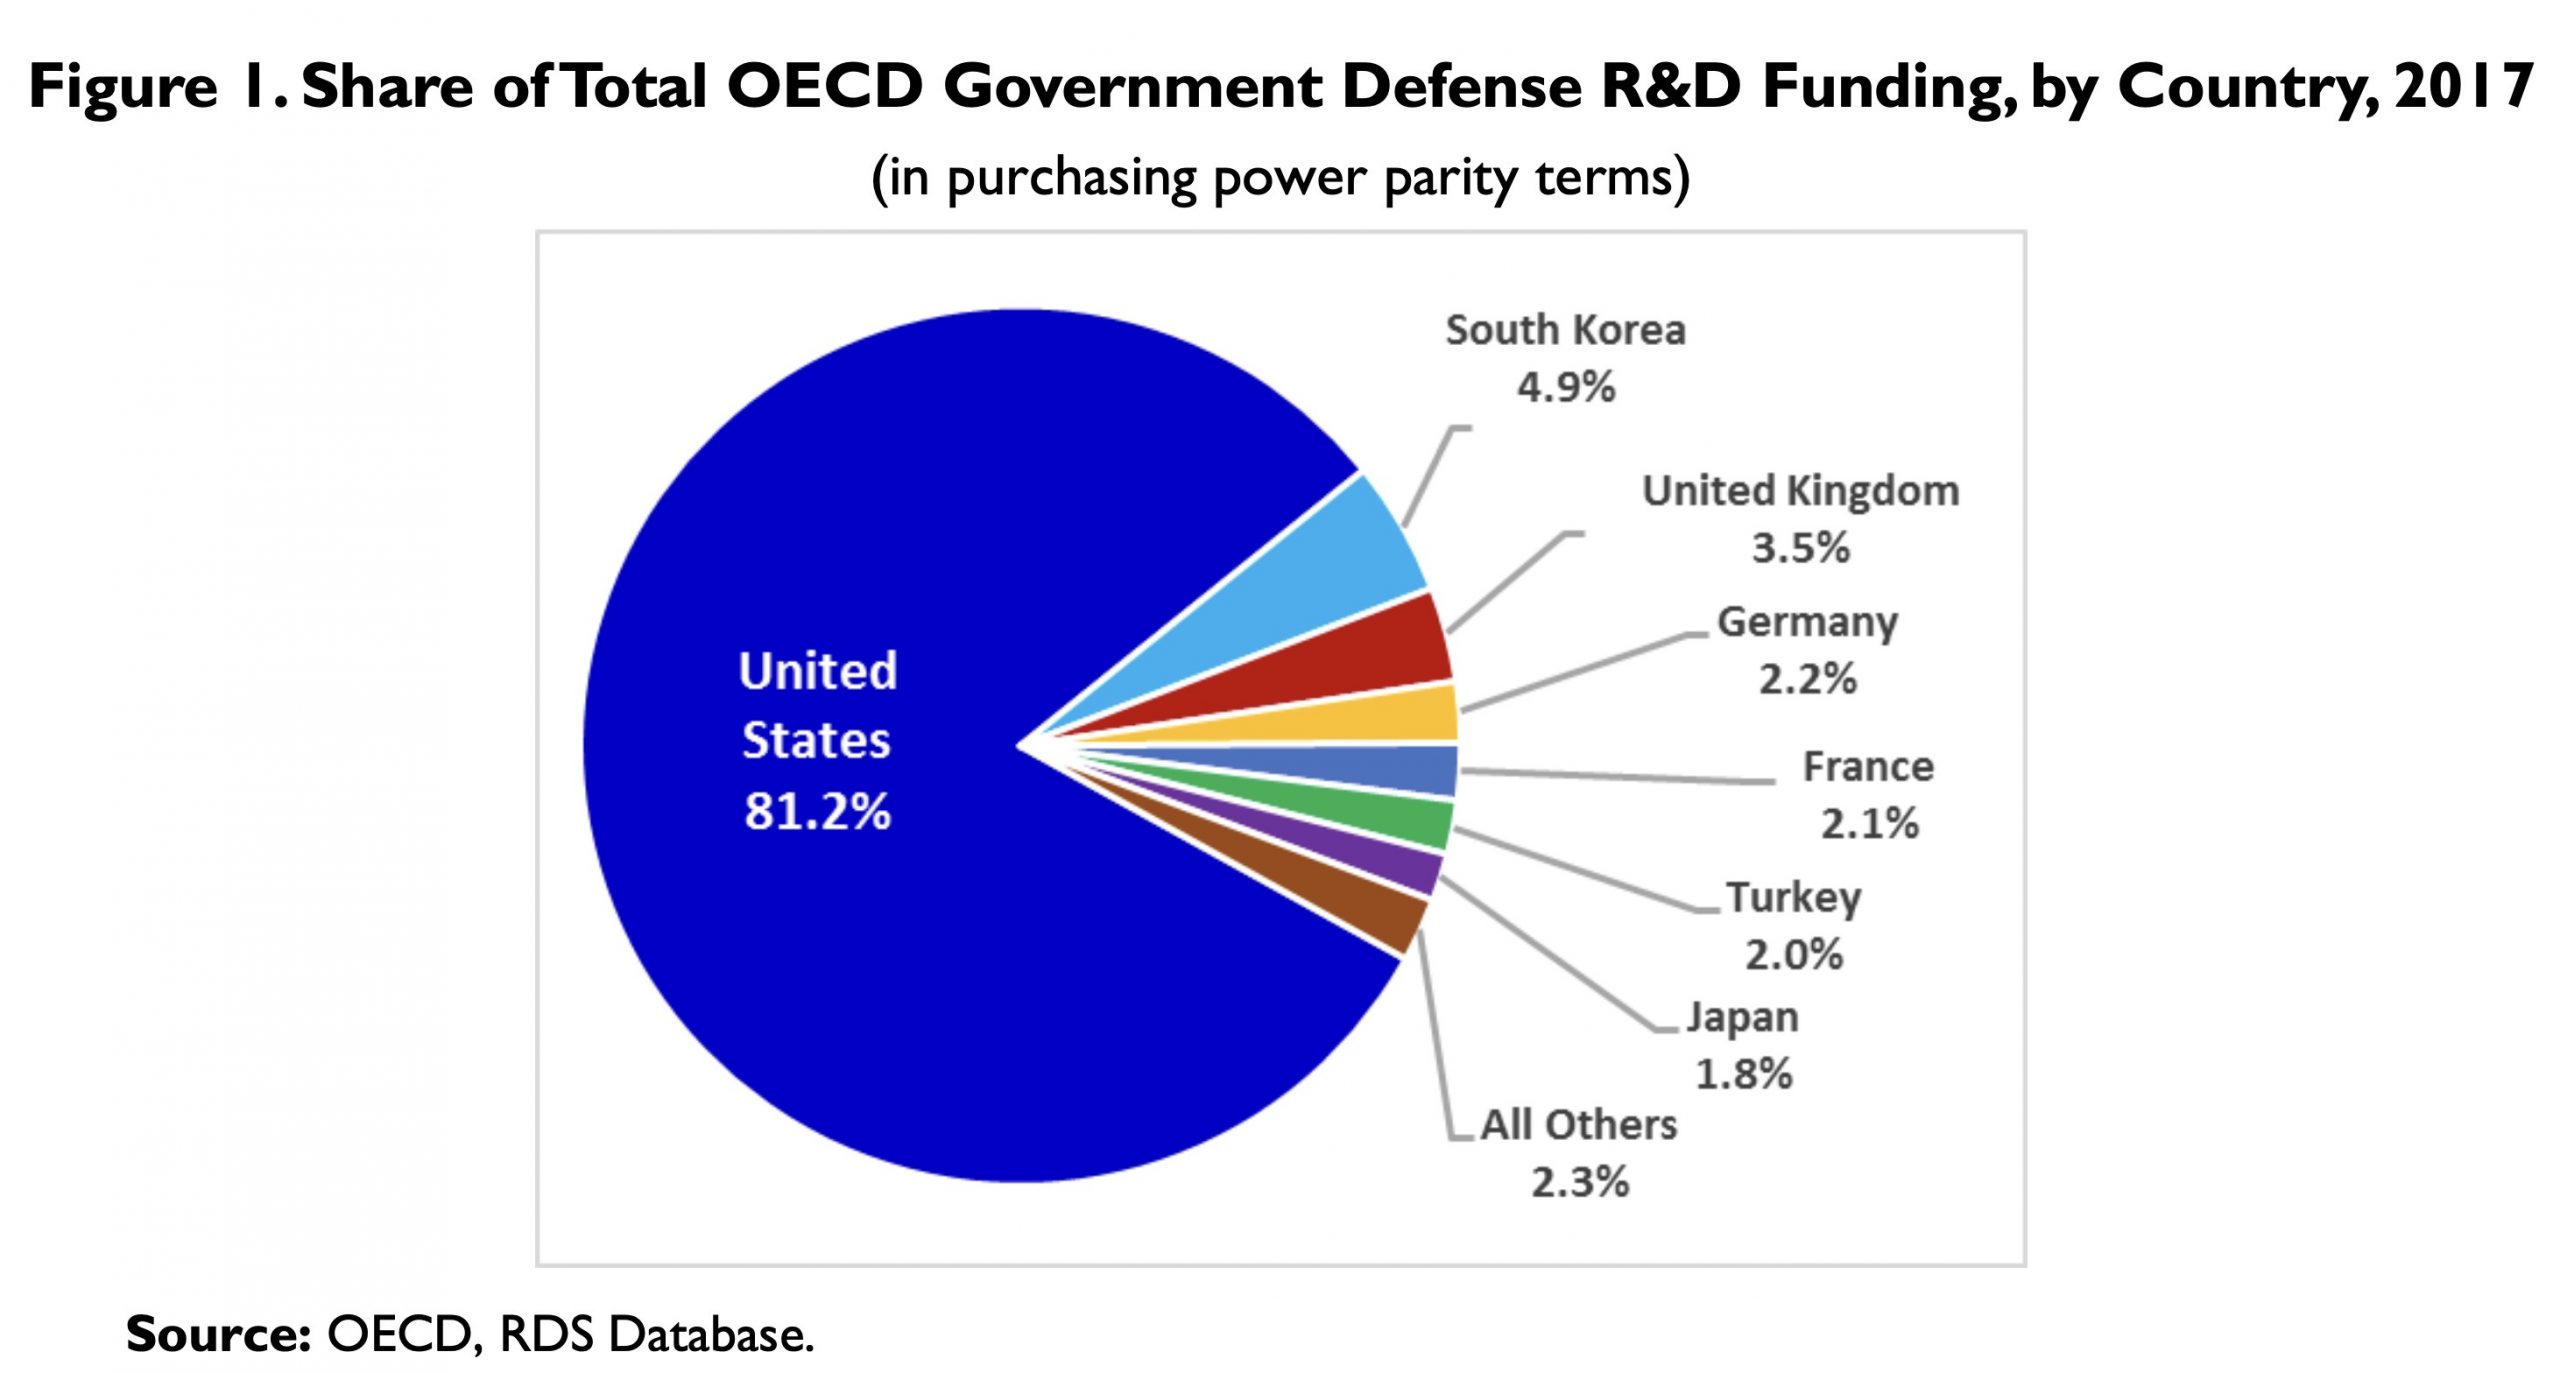 Share of Total OECD Government Defense R&D Funding, by Country